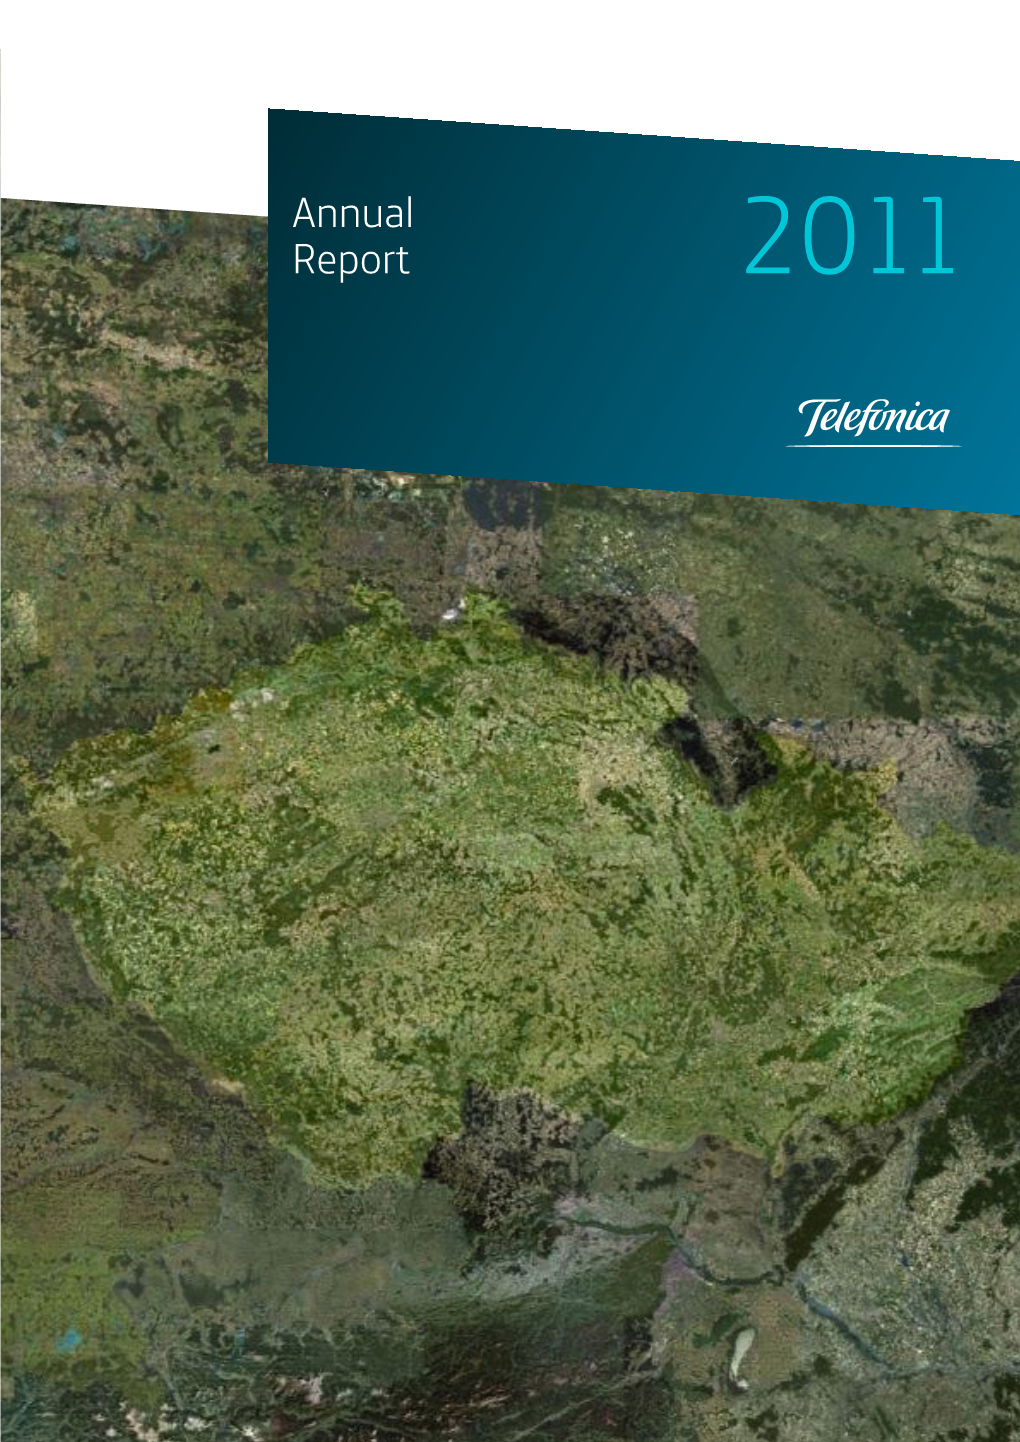 Download Annual Report In